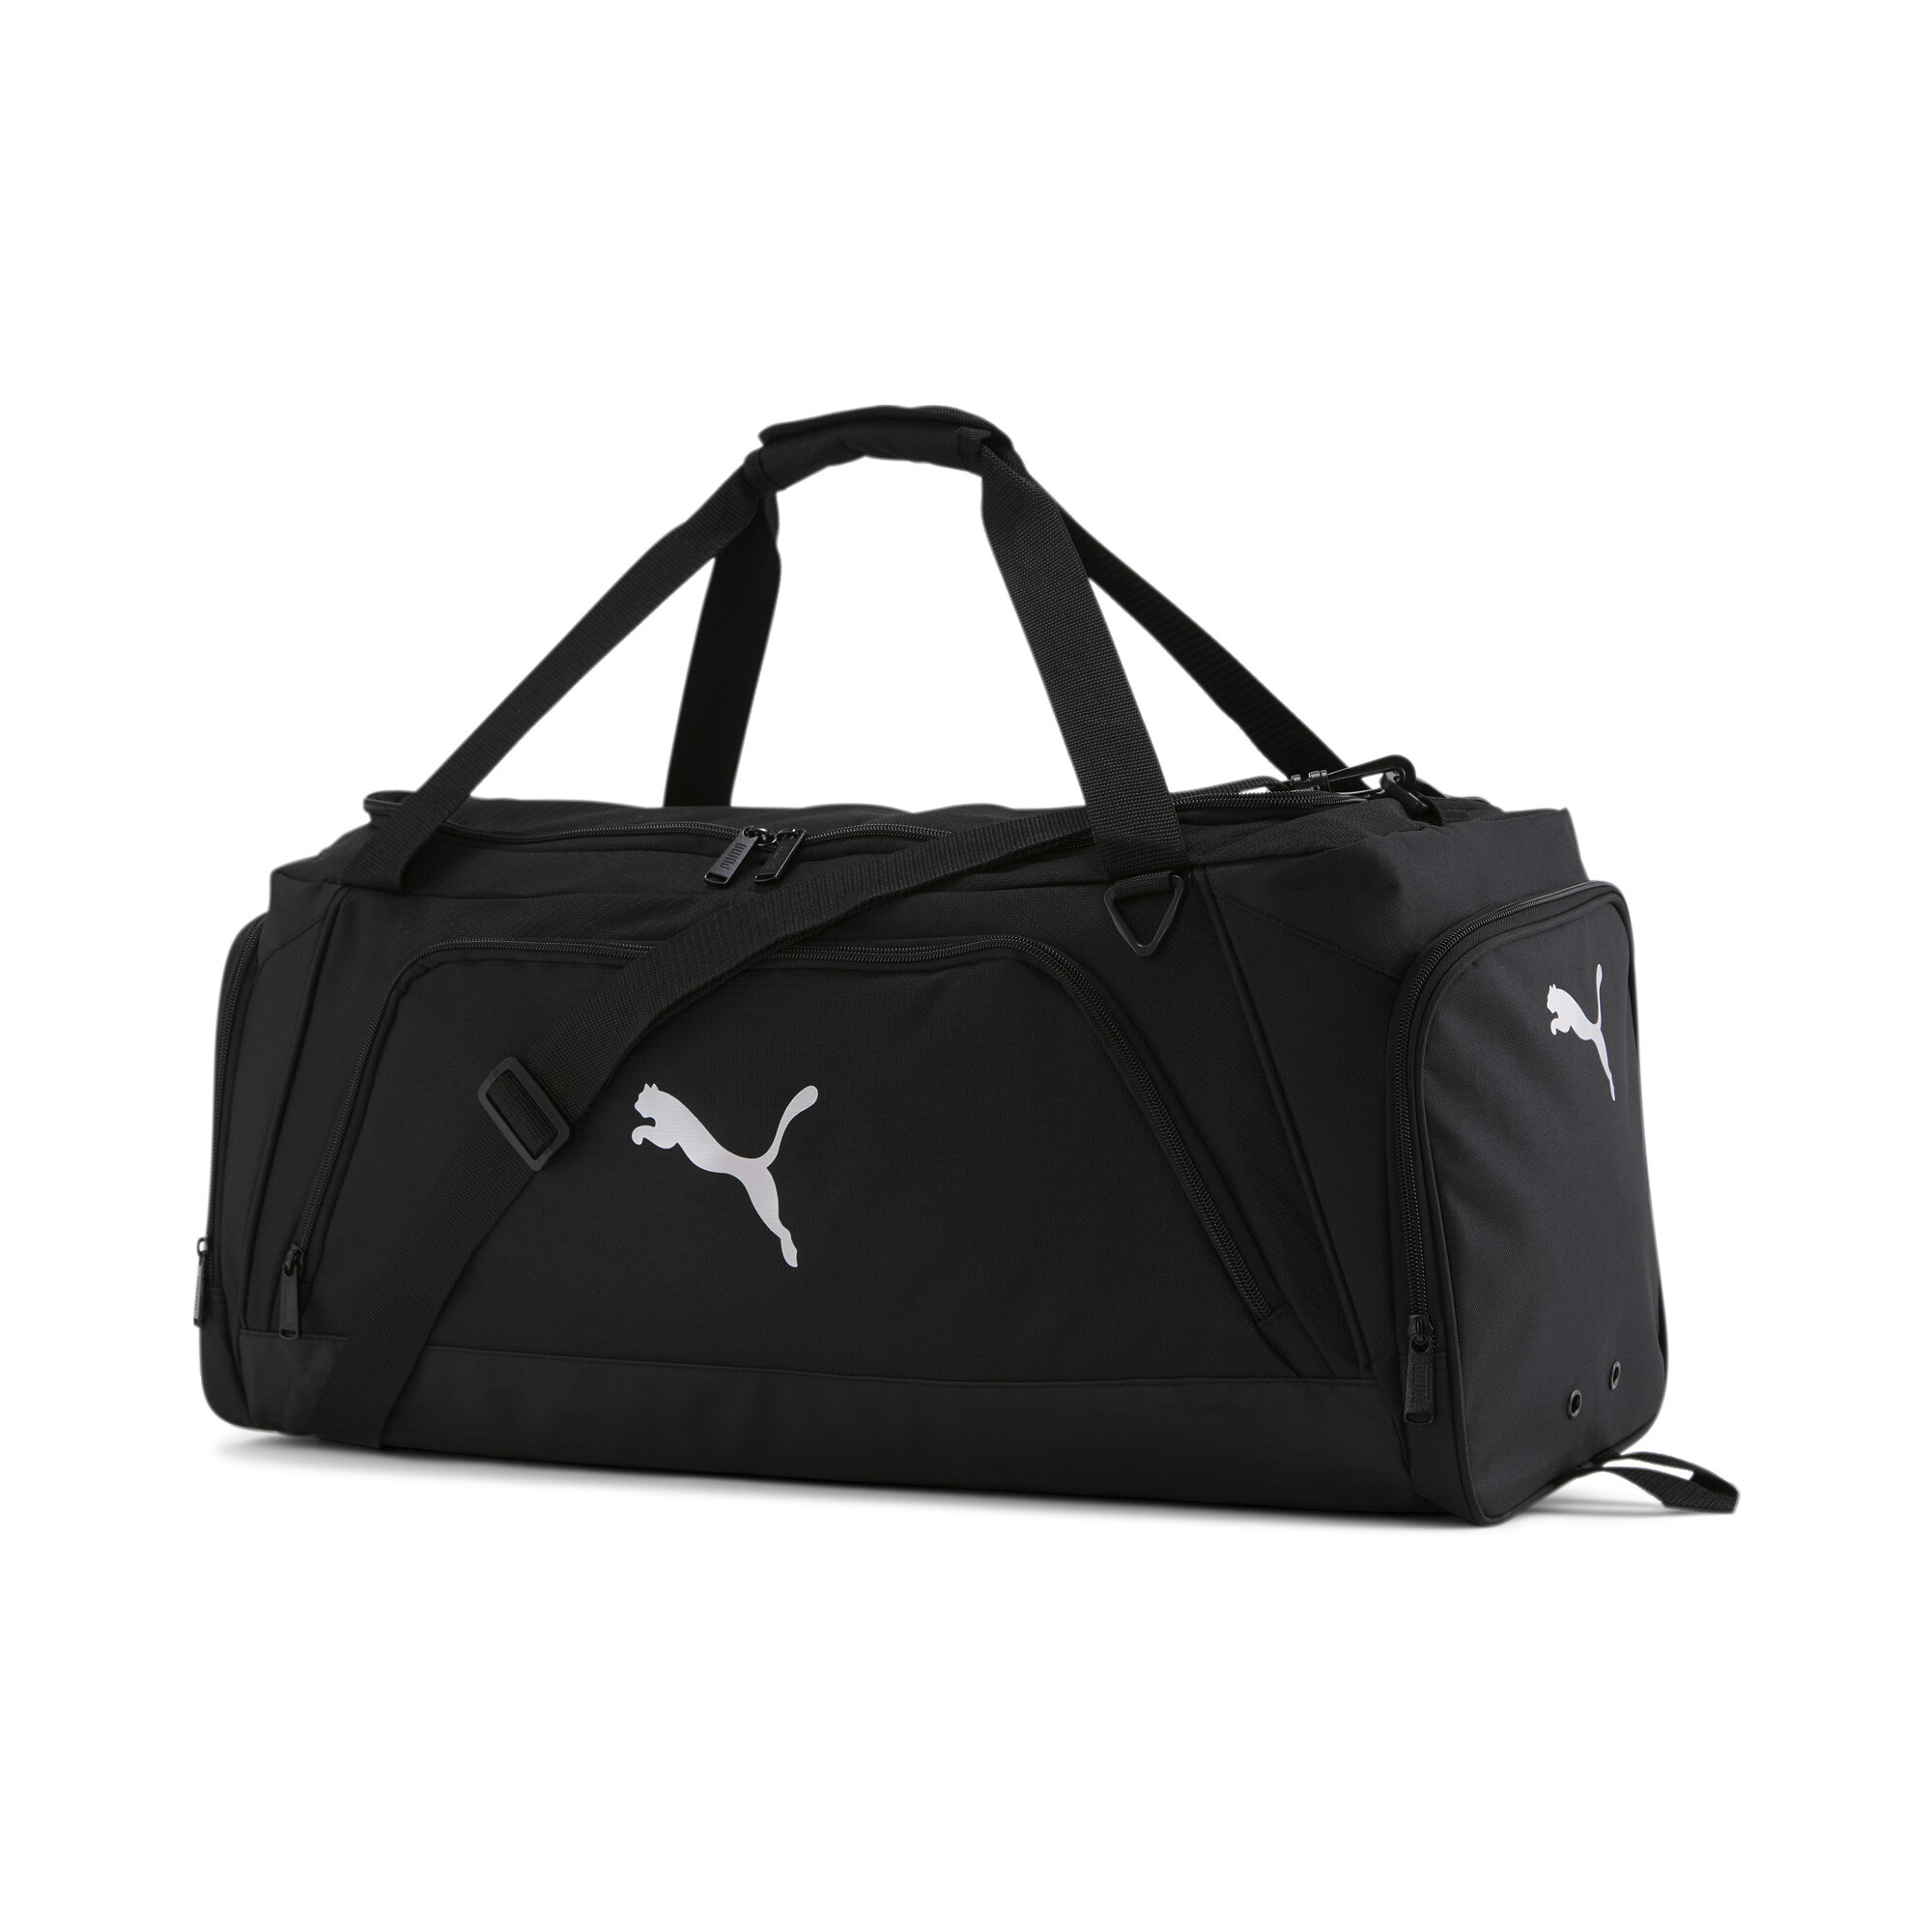 Mens Bags Luggage and suitcases PUMA Synthetic Duffel Bags in Black for Men 